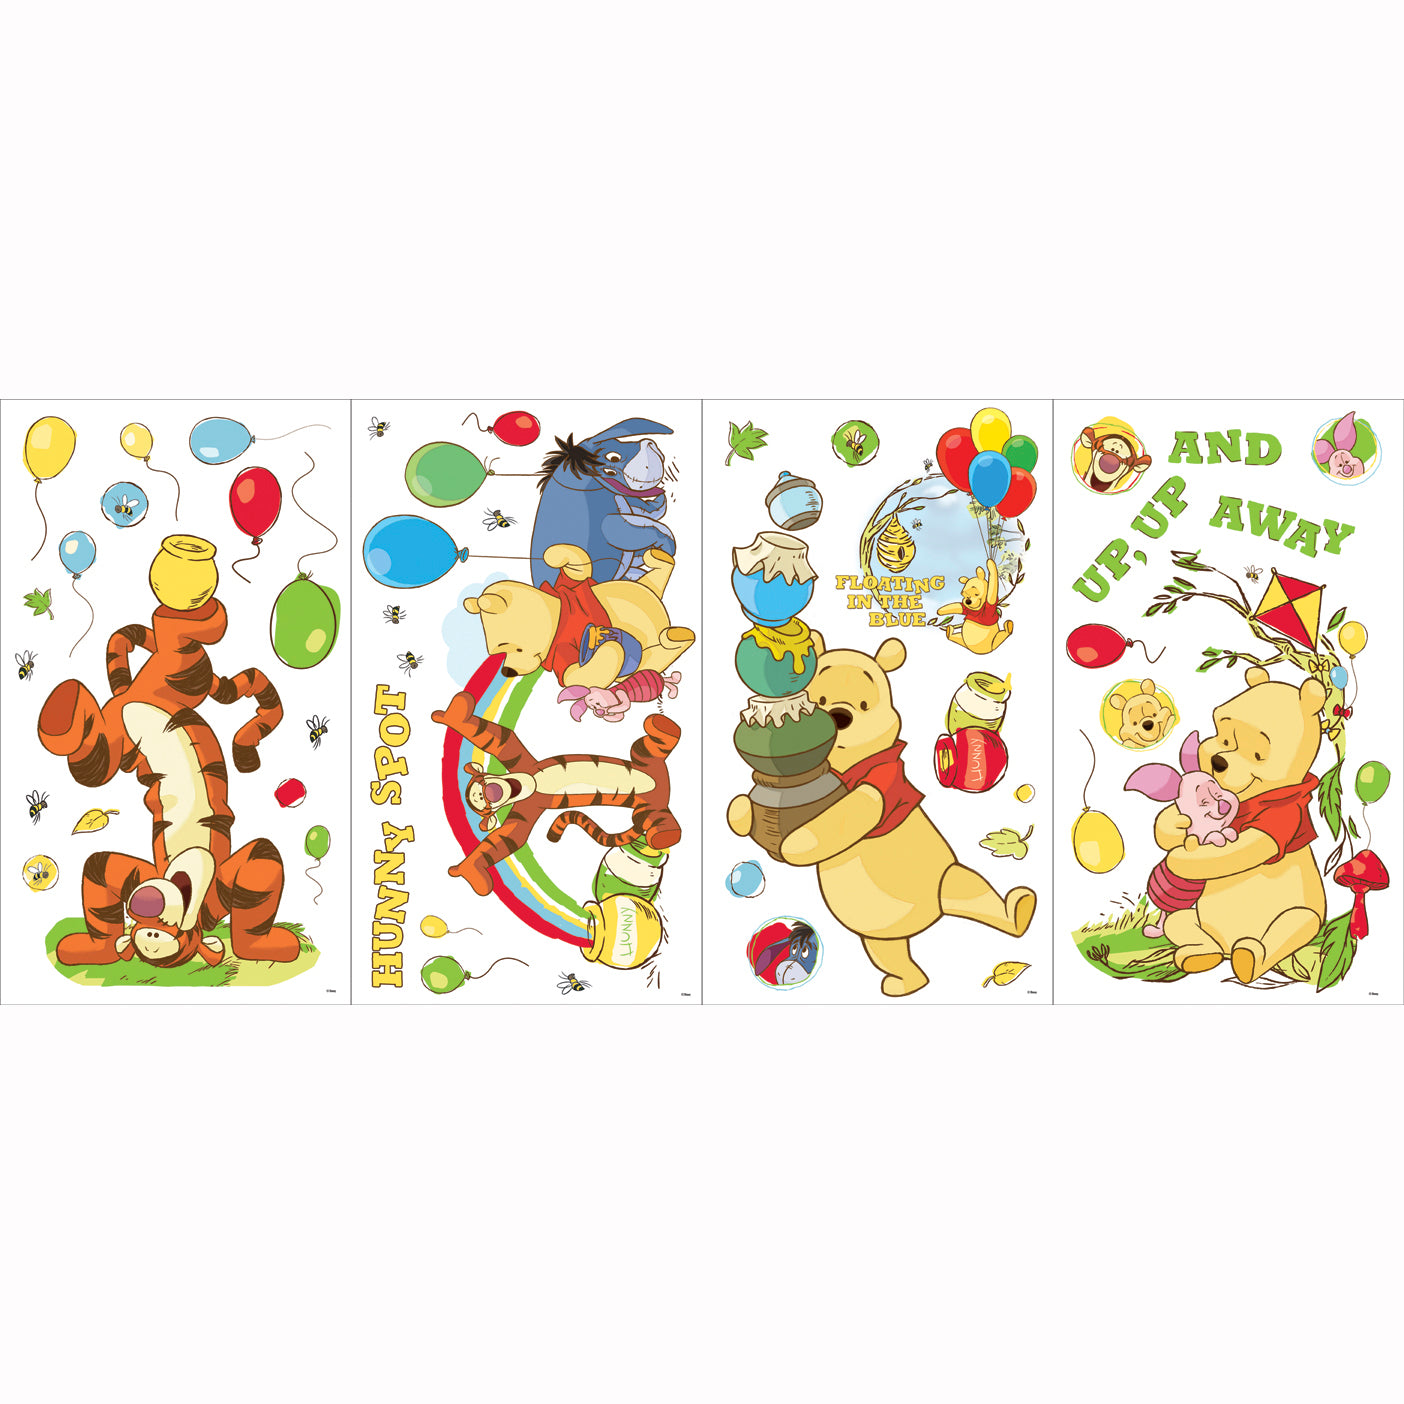 Winnie the Pooh Bedroom Decor - Worry Free Day Wall Stickers